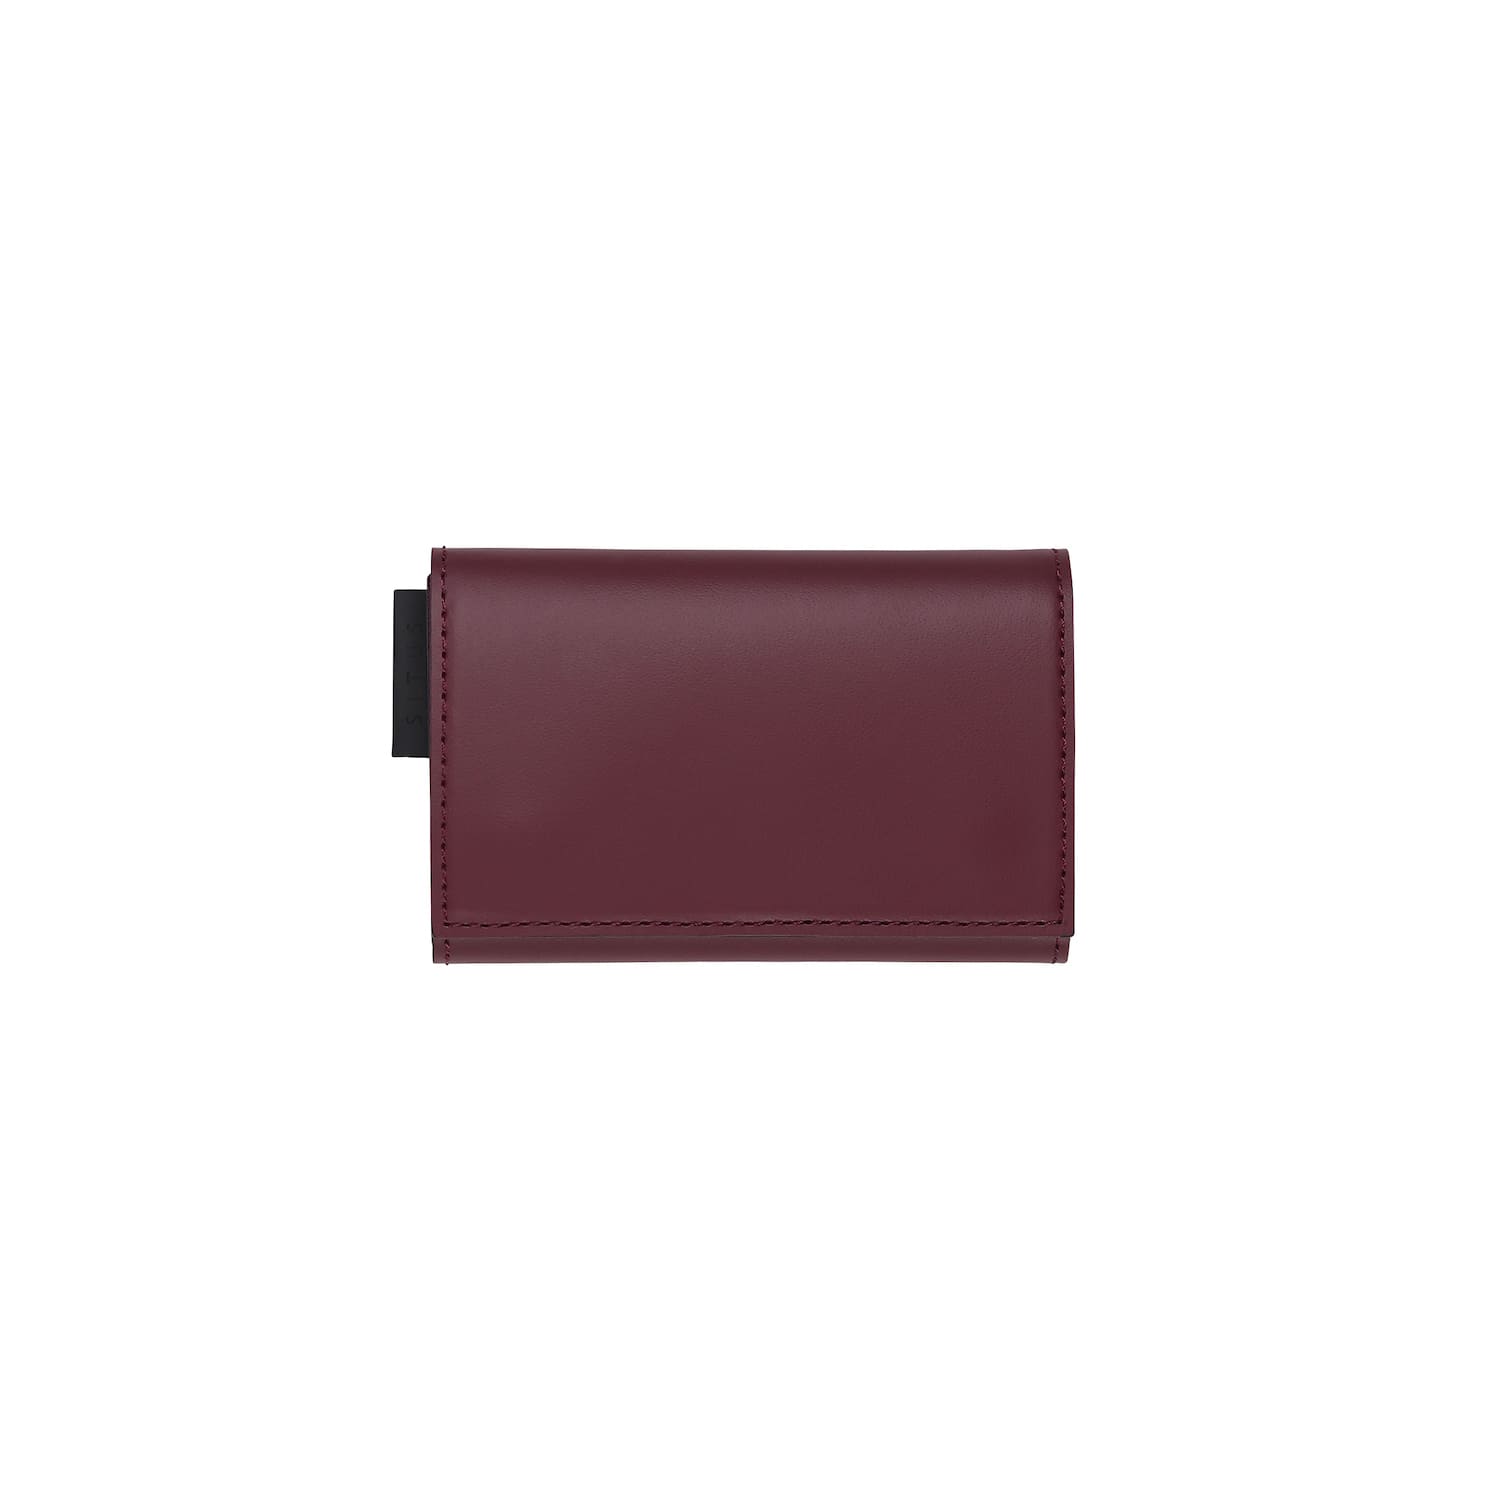 TINY WALLET RECYCLED LEATHER | 財布の全てに『機能美』を。 – SITUS